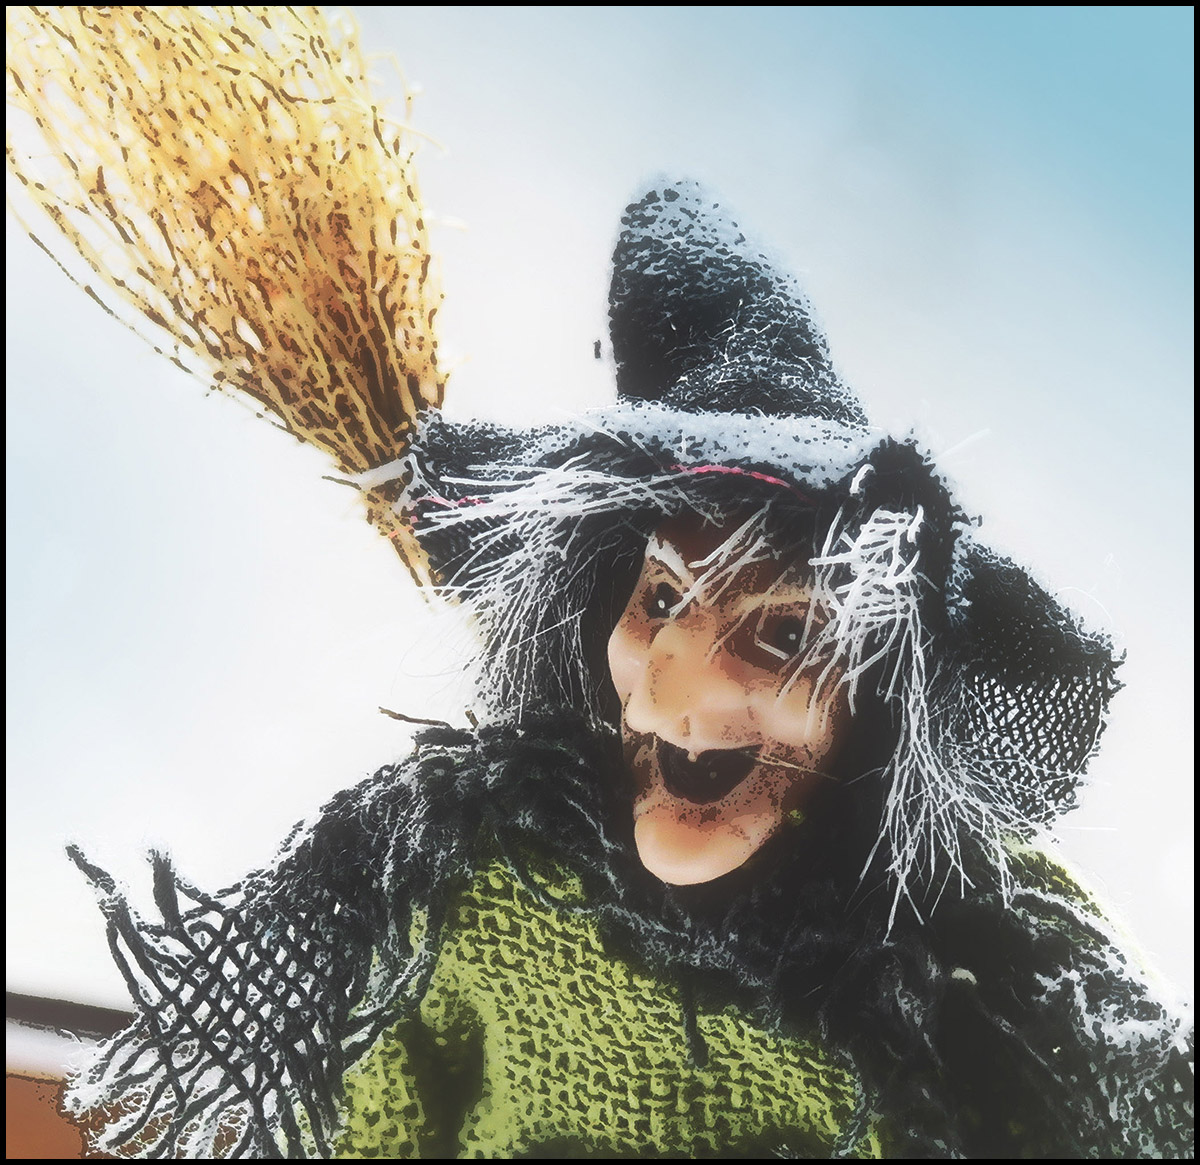 La Befana – In Southern Italy This Whimsical Character Embraces